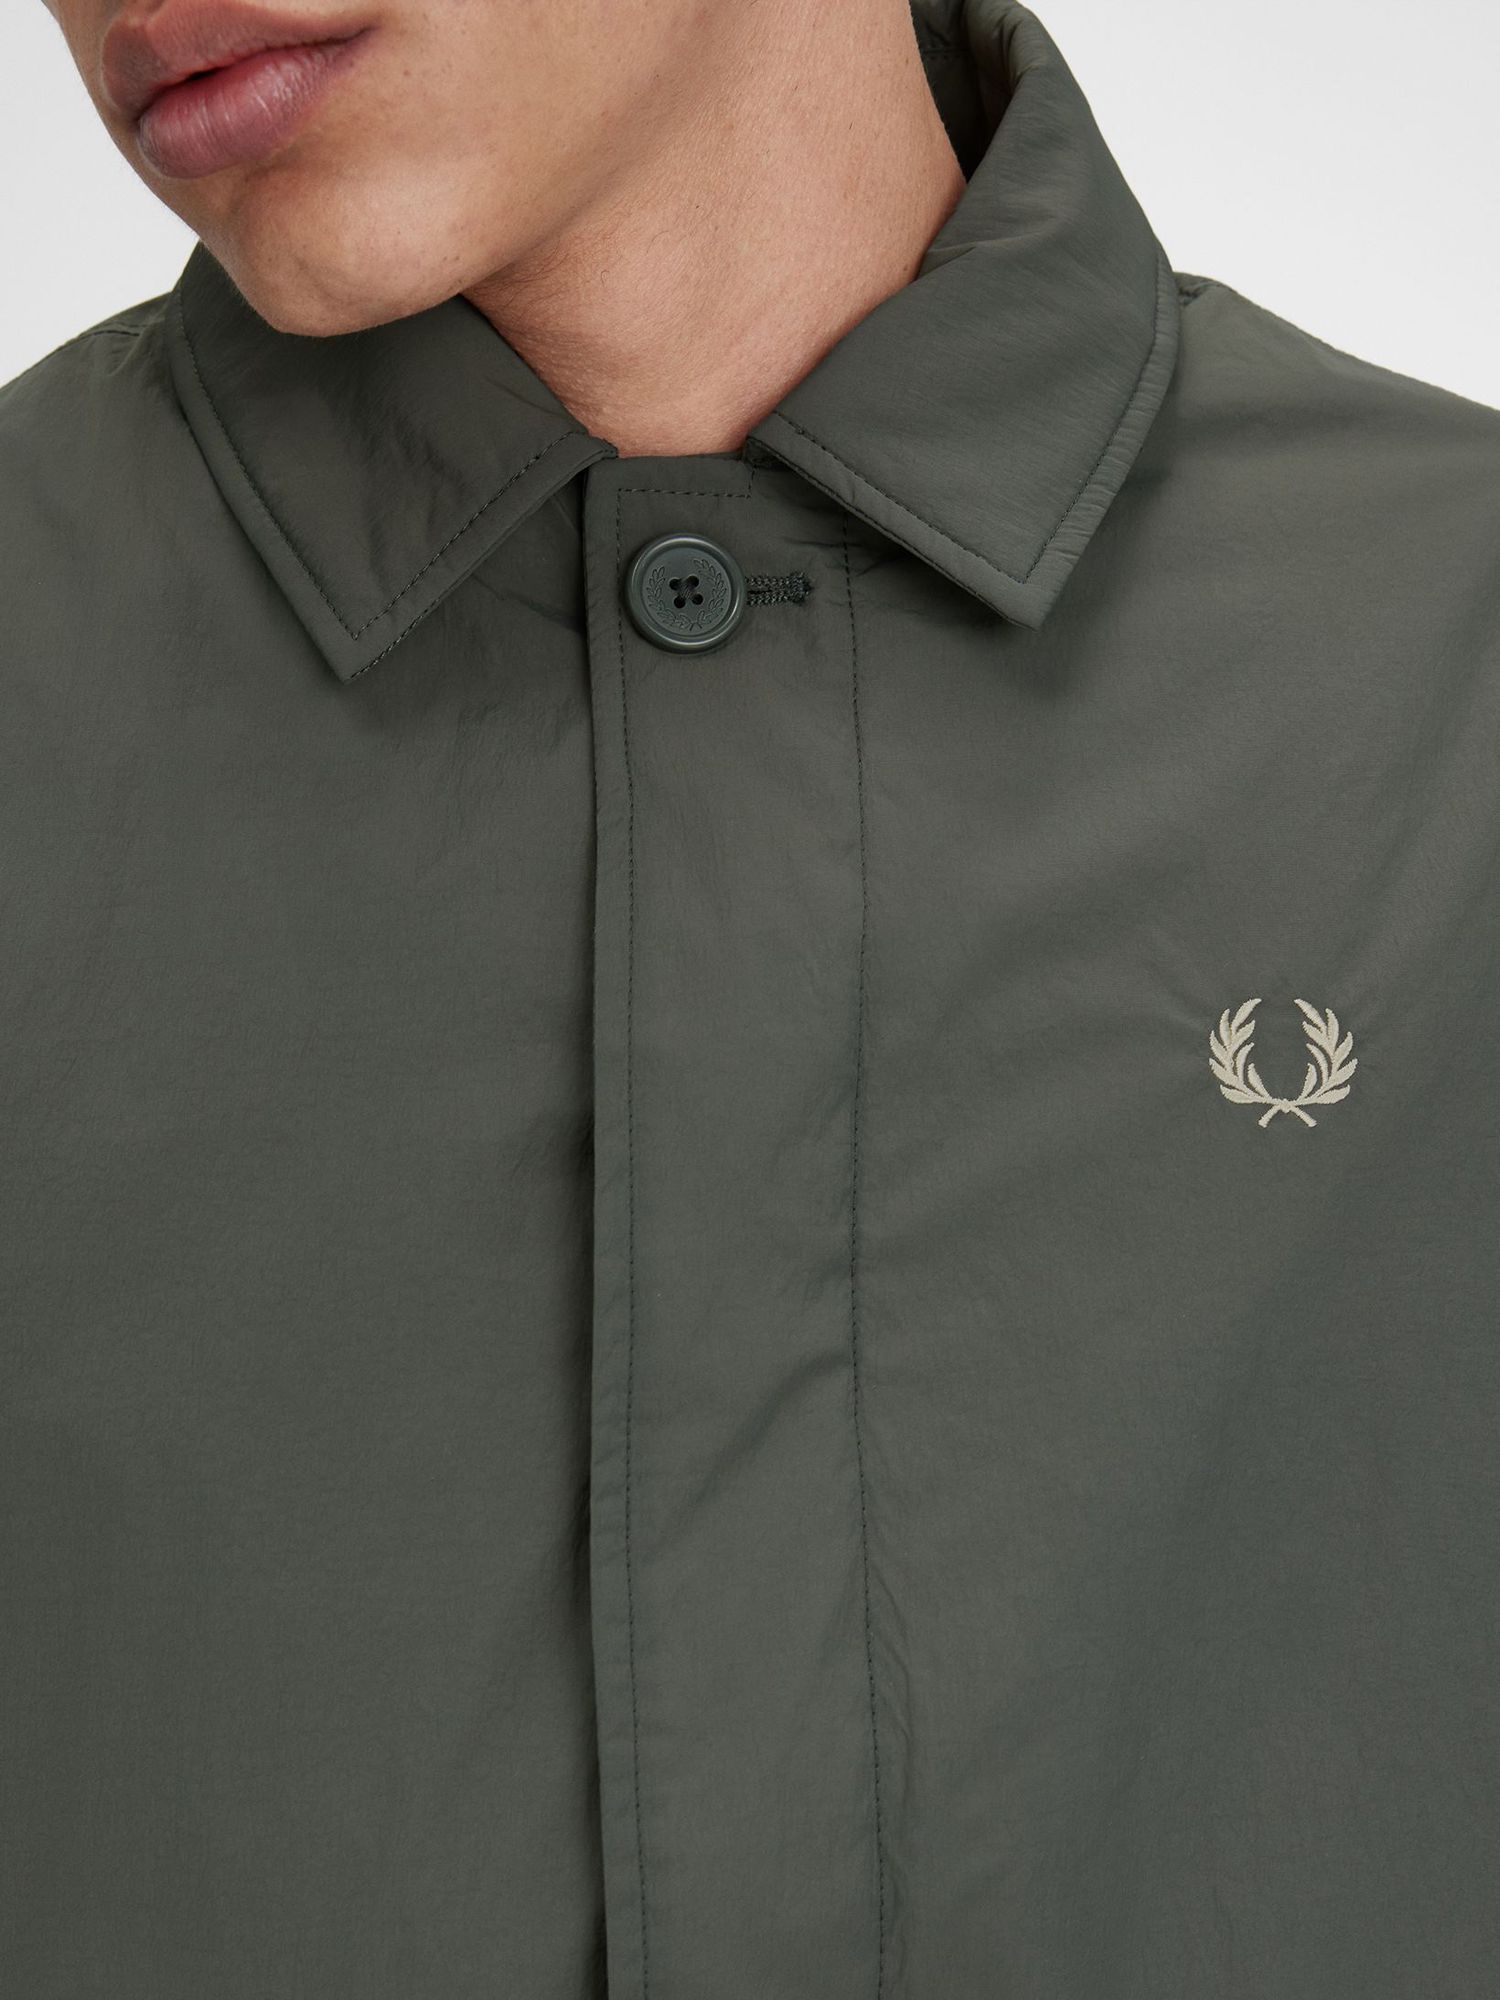 Fred Perry Shell Mac Jacket, Green, M